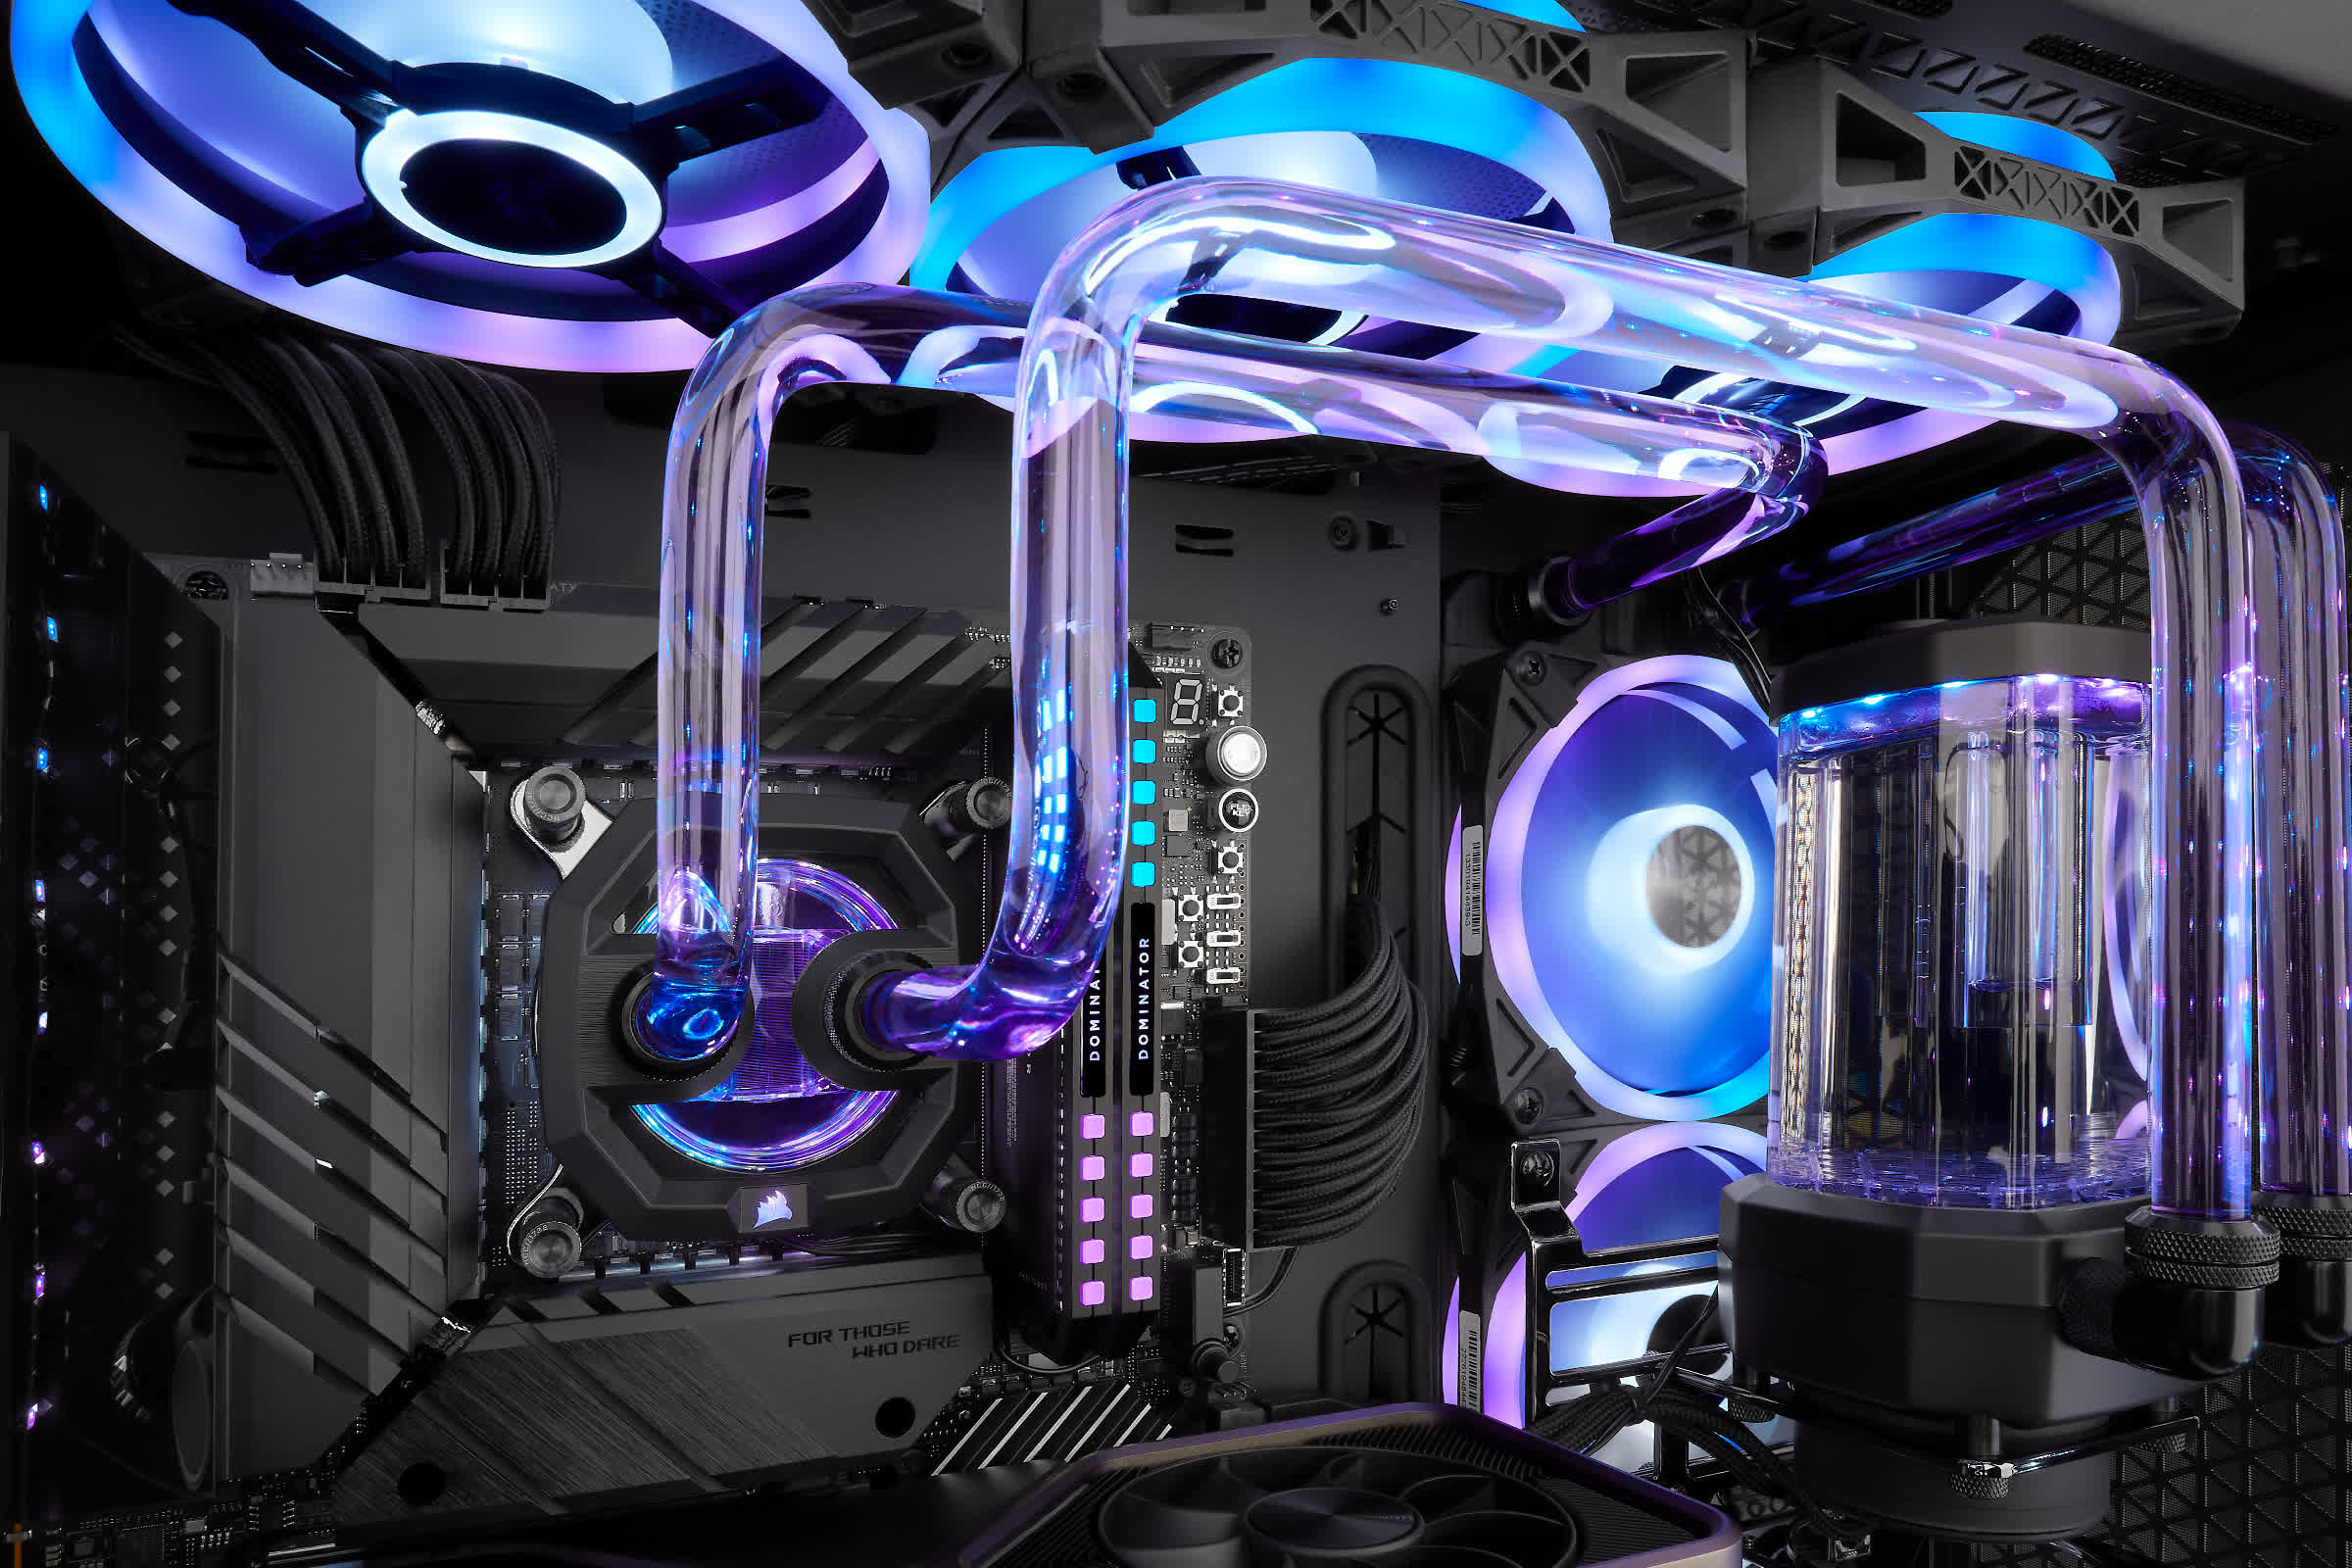 Corsair kits include everything to build your own custom liquid cooling loop